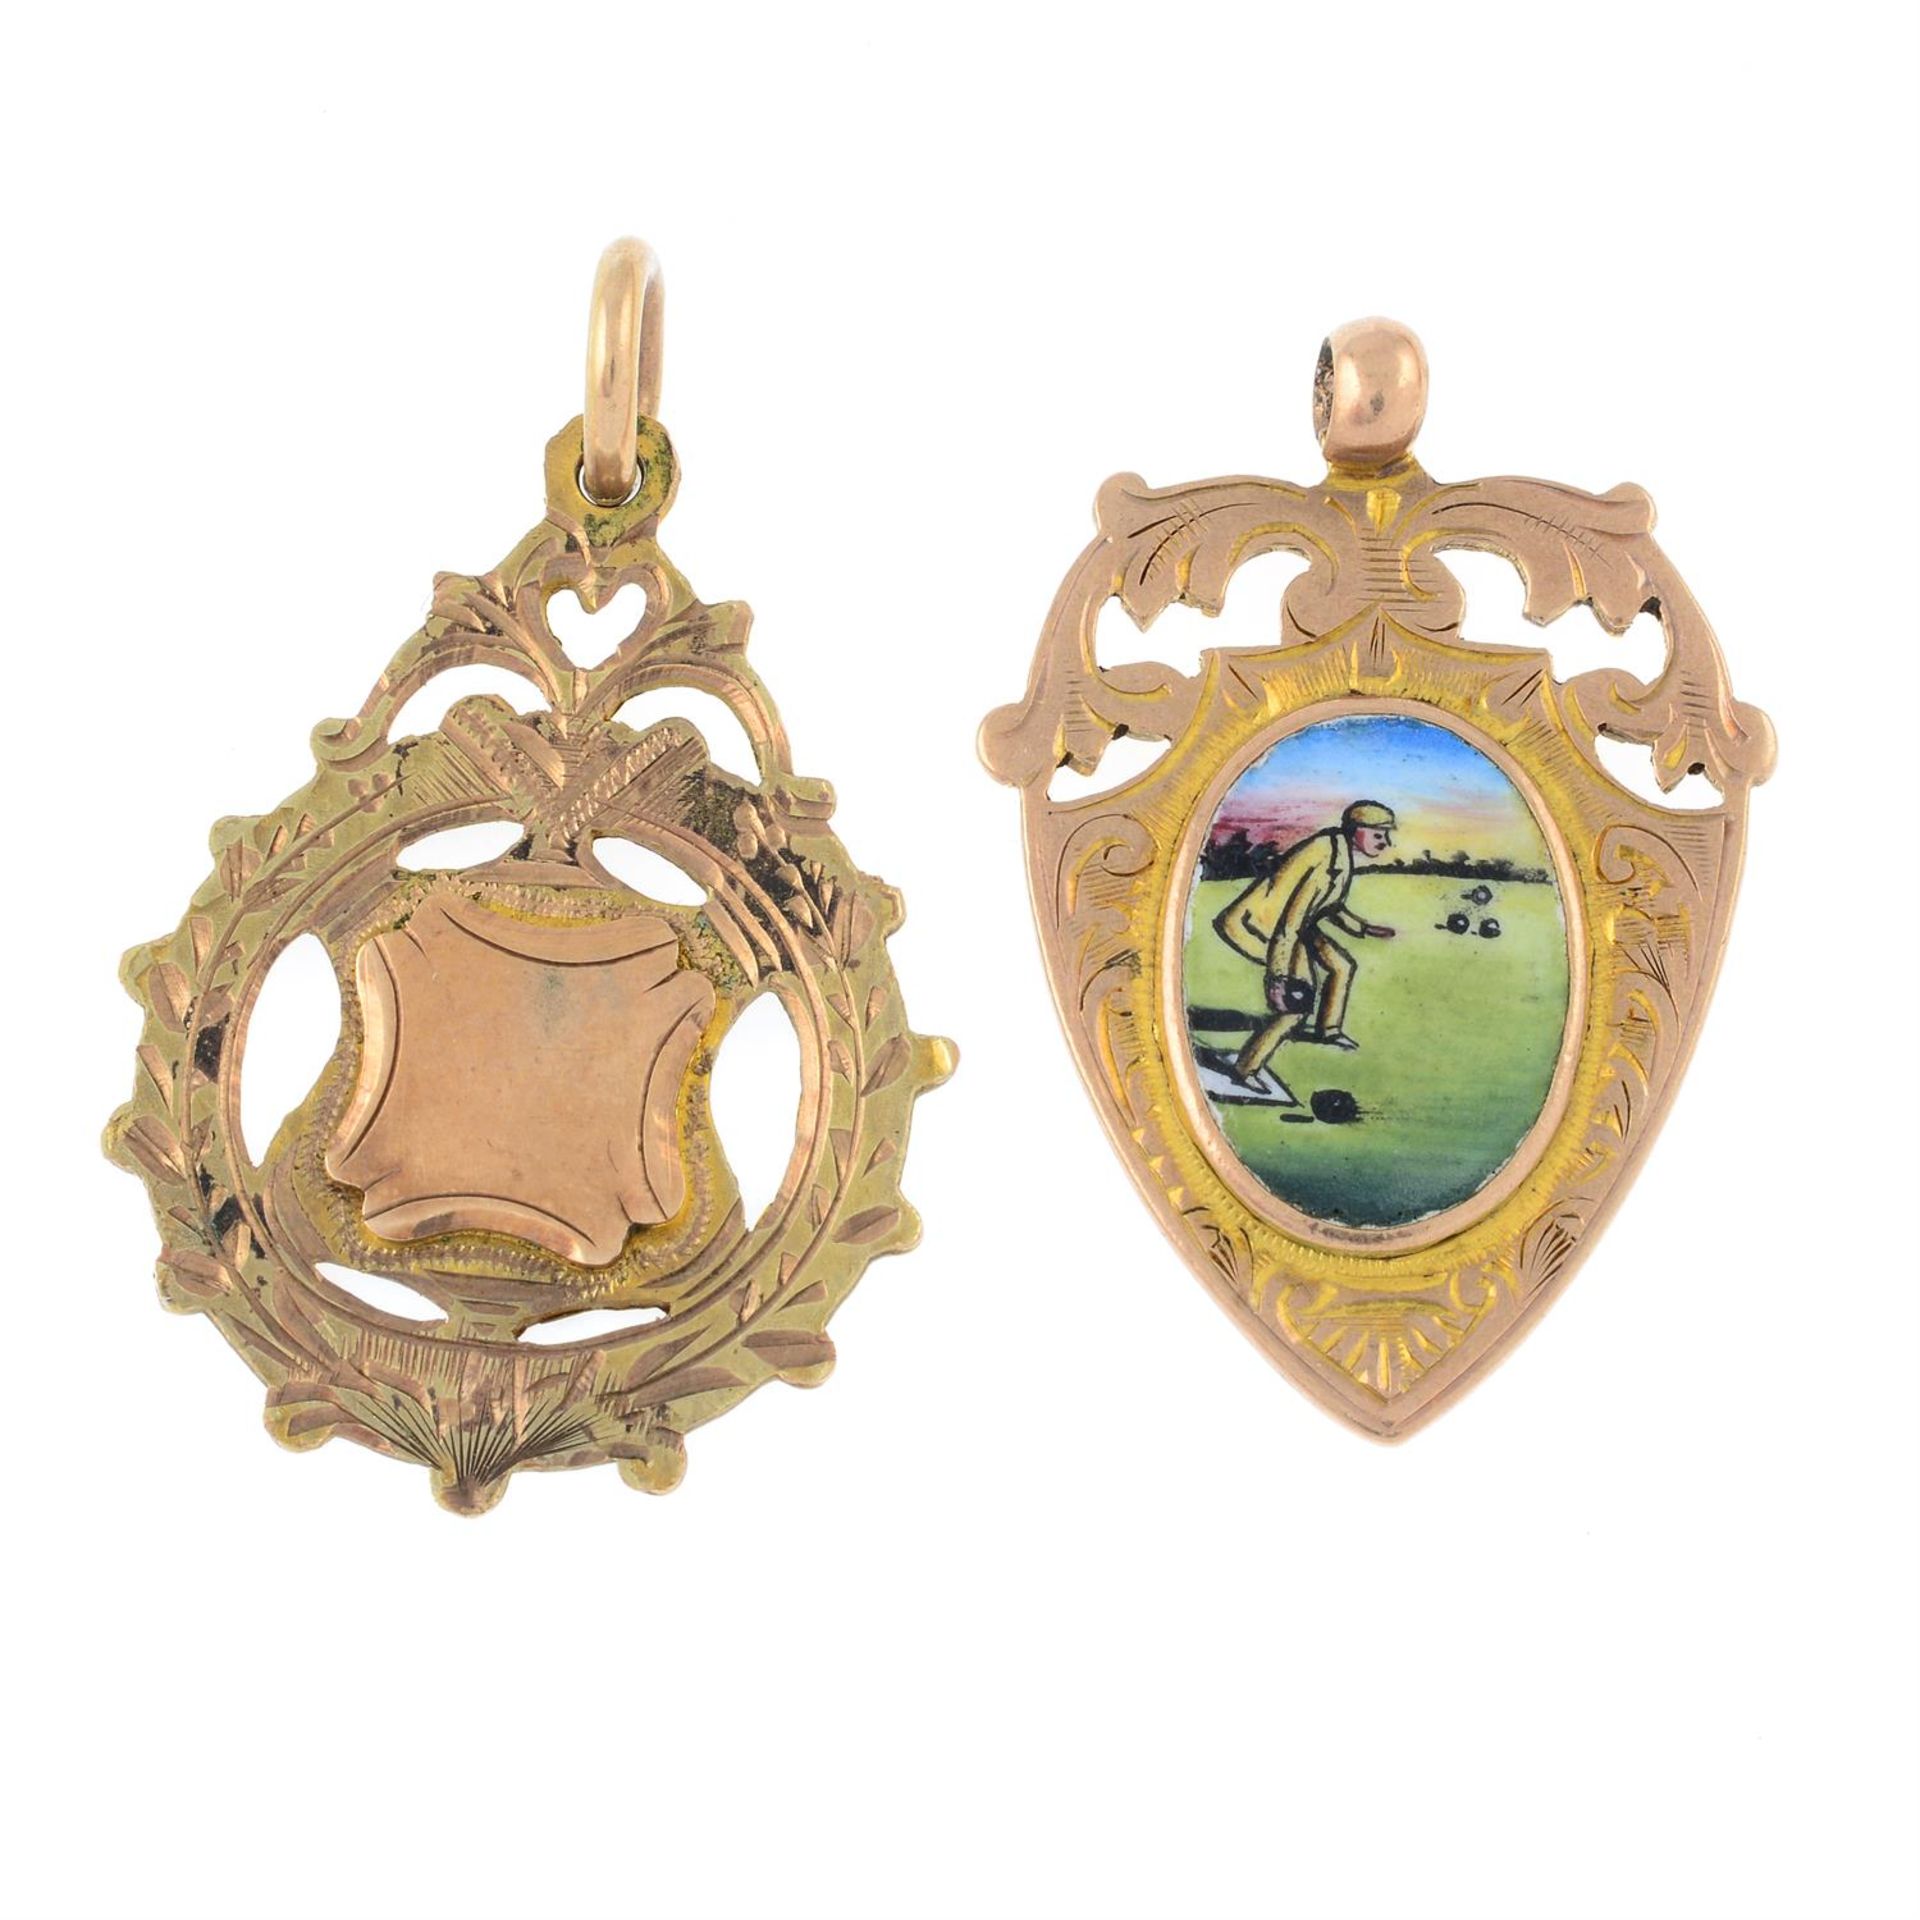 Two early 20th century 9ct gold medals.